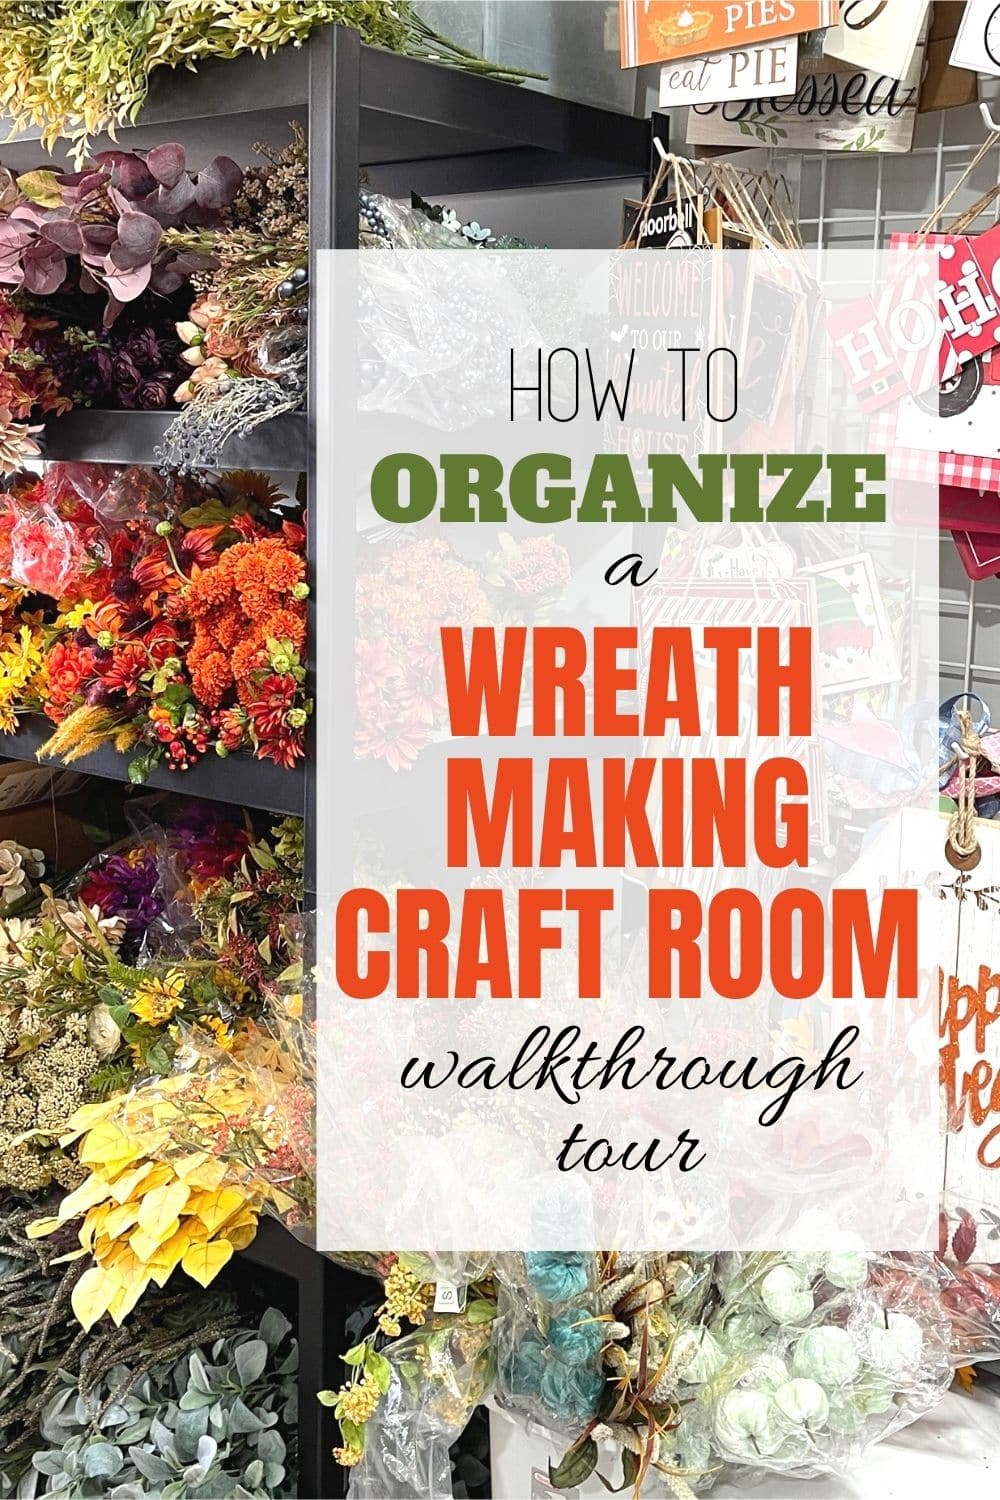 How to Organize a Wreath Making Craft Room - Southern Charm Wreaths